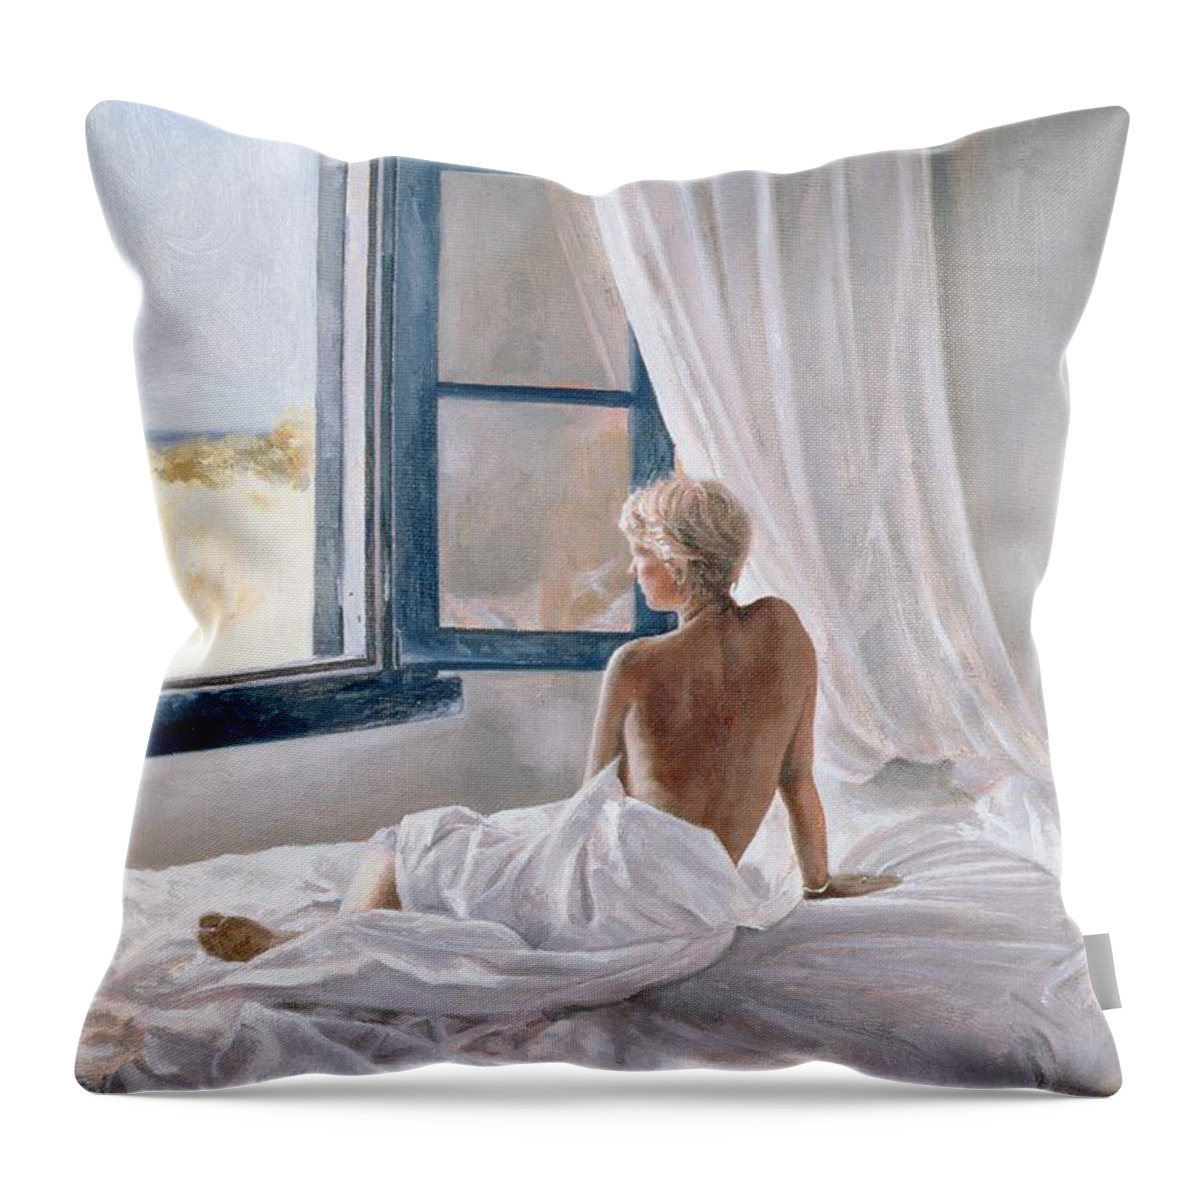 Bed; Sheets; Bedsheets; Window; Female; Nude; Bedroom; Nude Throw Pillow featuring the painting Afternoon View by John Worthington